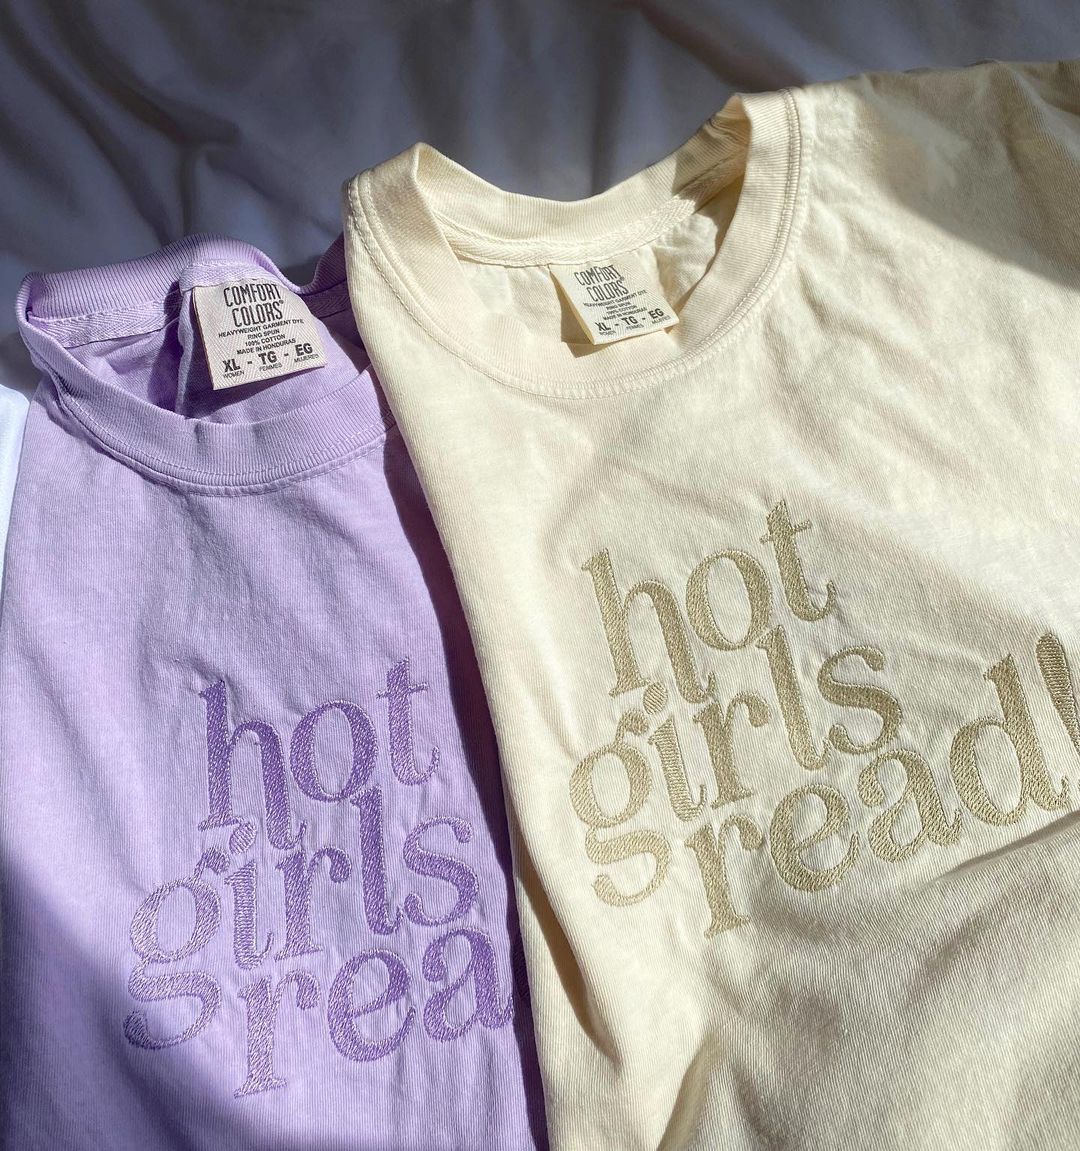 Hot Girls Read! embroidered on the front of a Comfort Colors T-Shirt from presshall.com